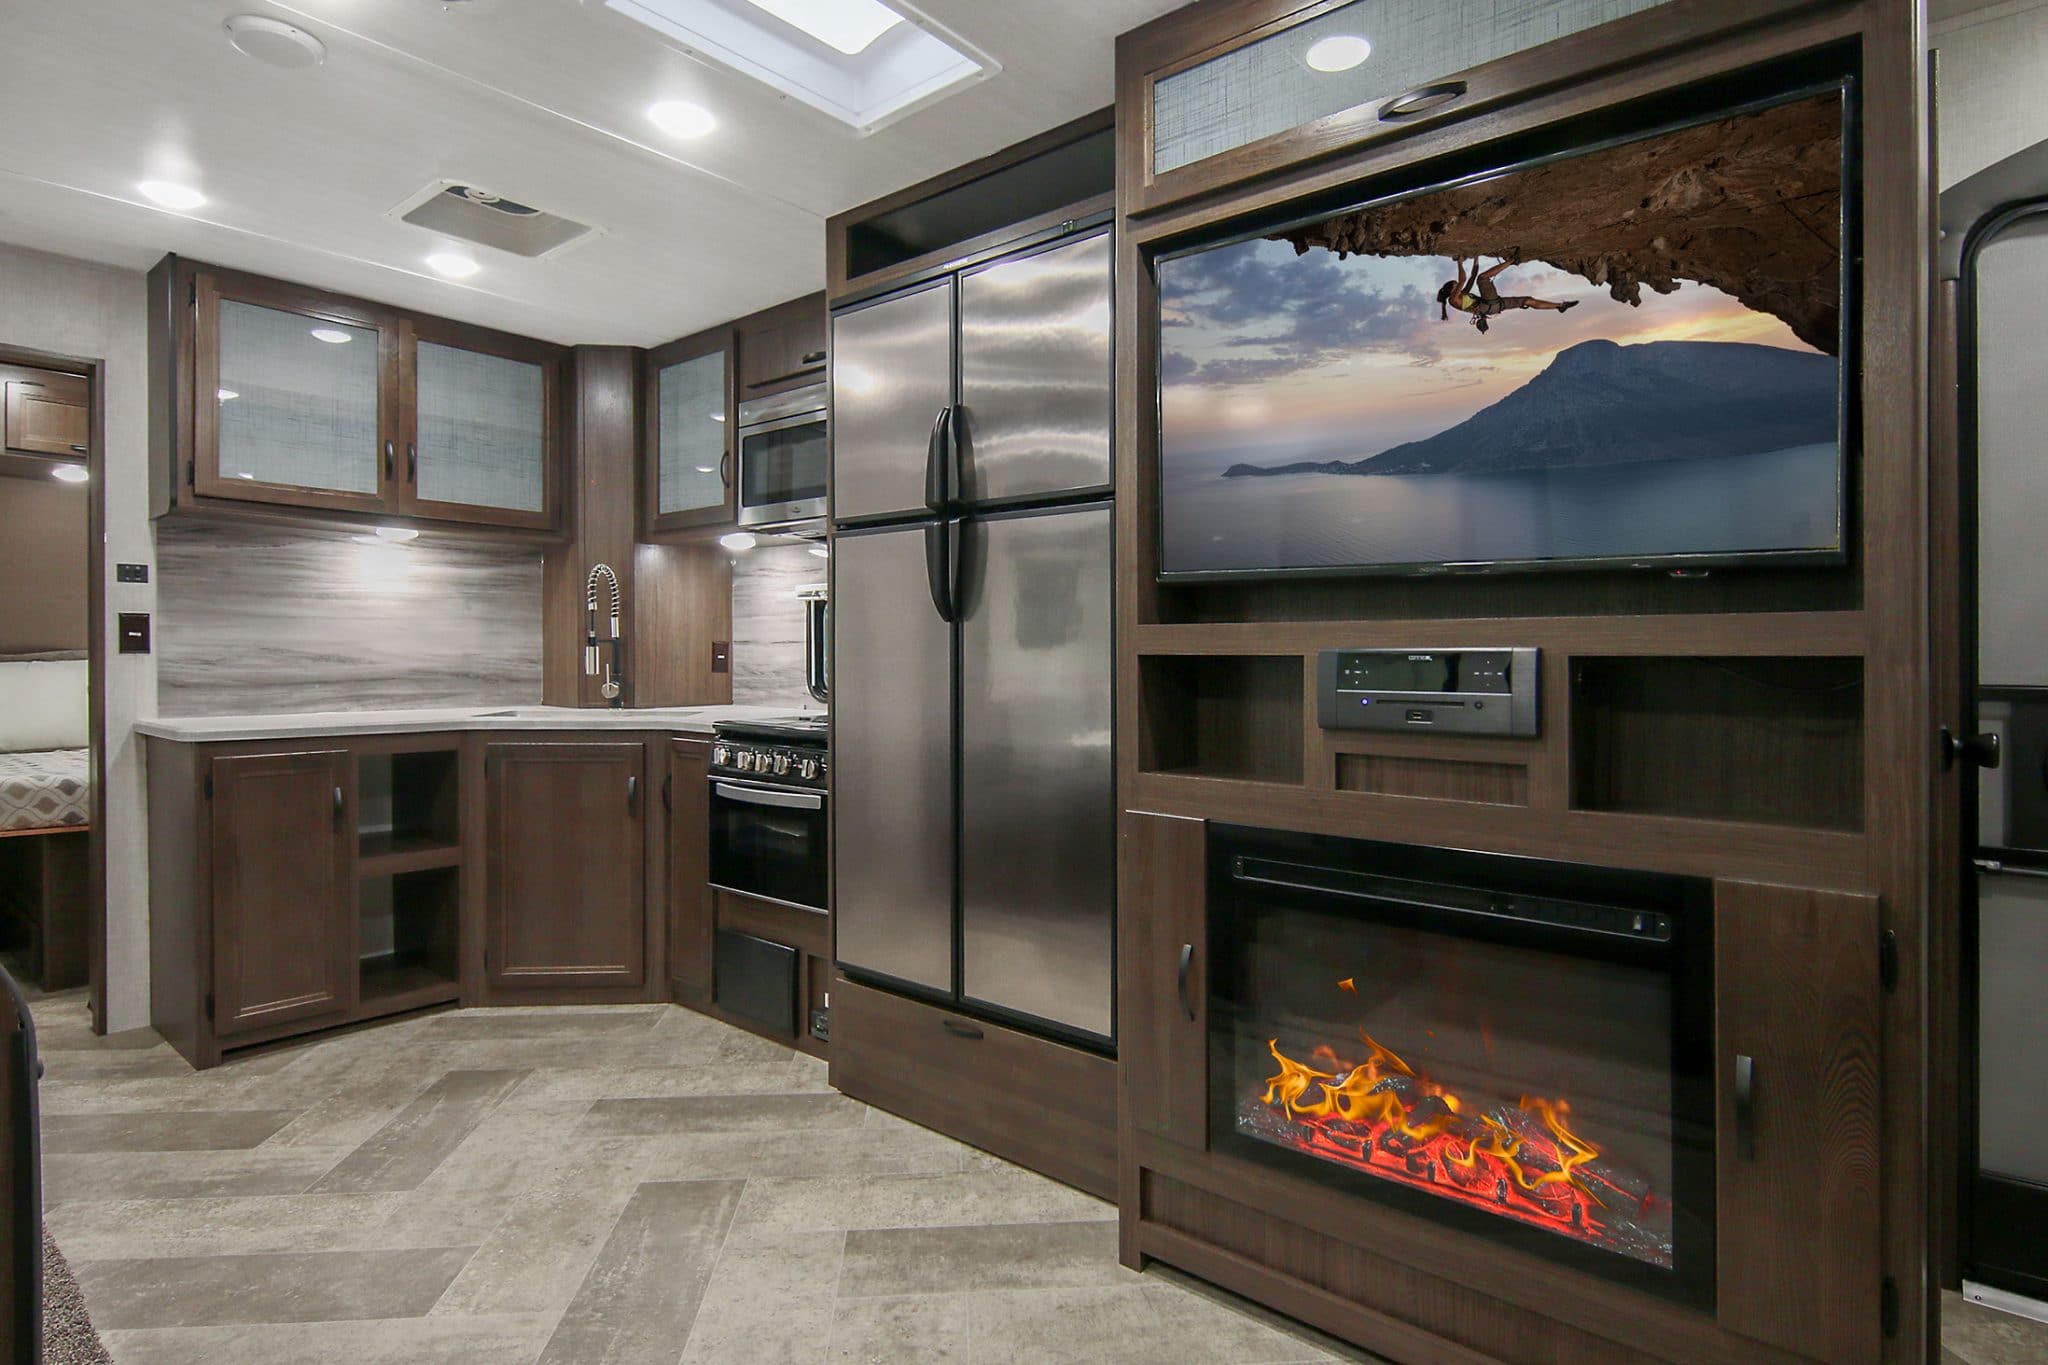 Interior of Voyage trailer showing electric fireplace and stainless refrigerator.